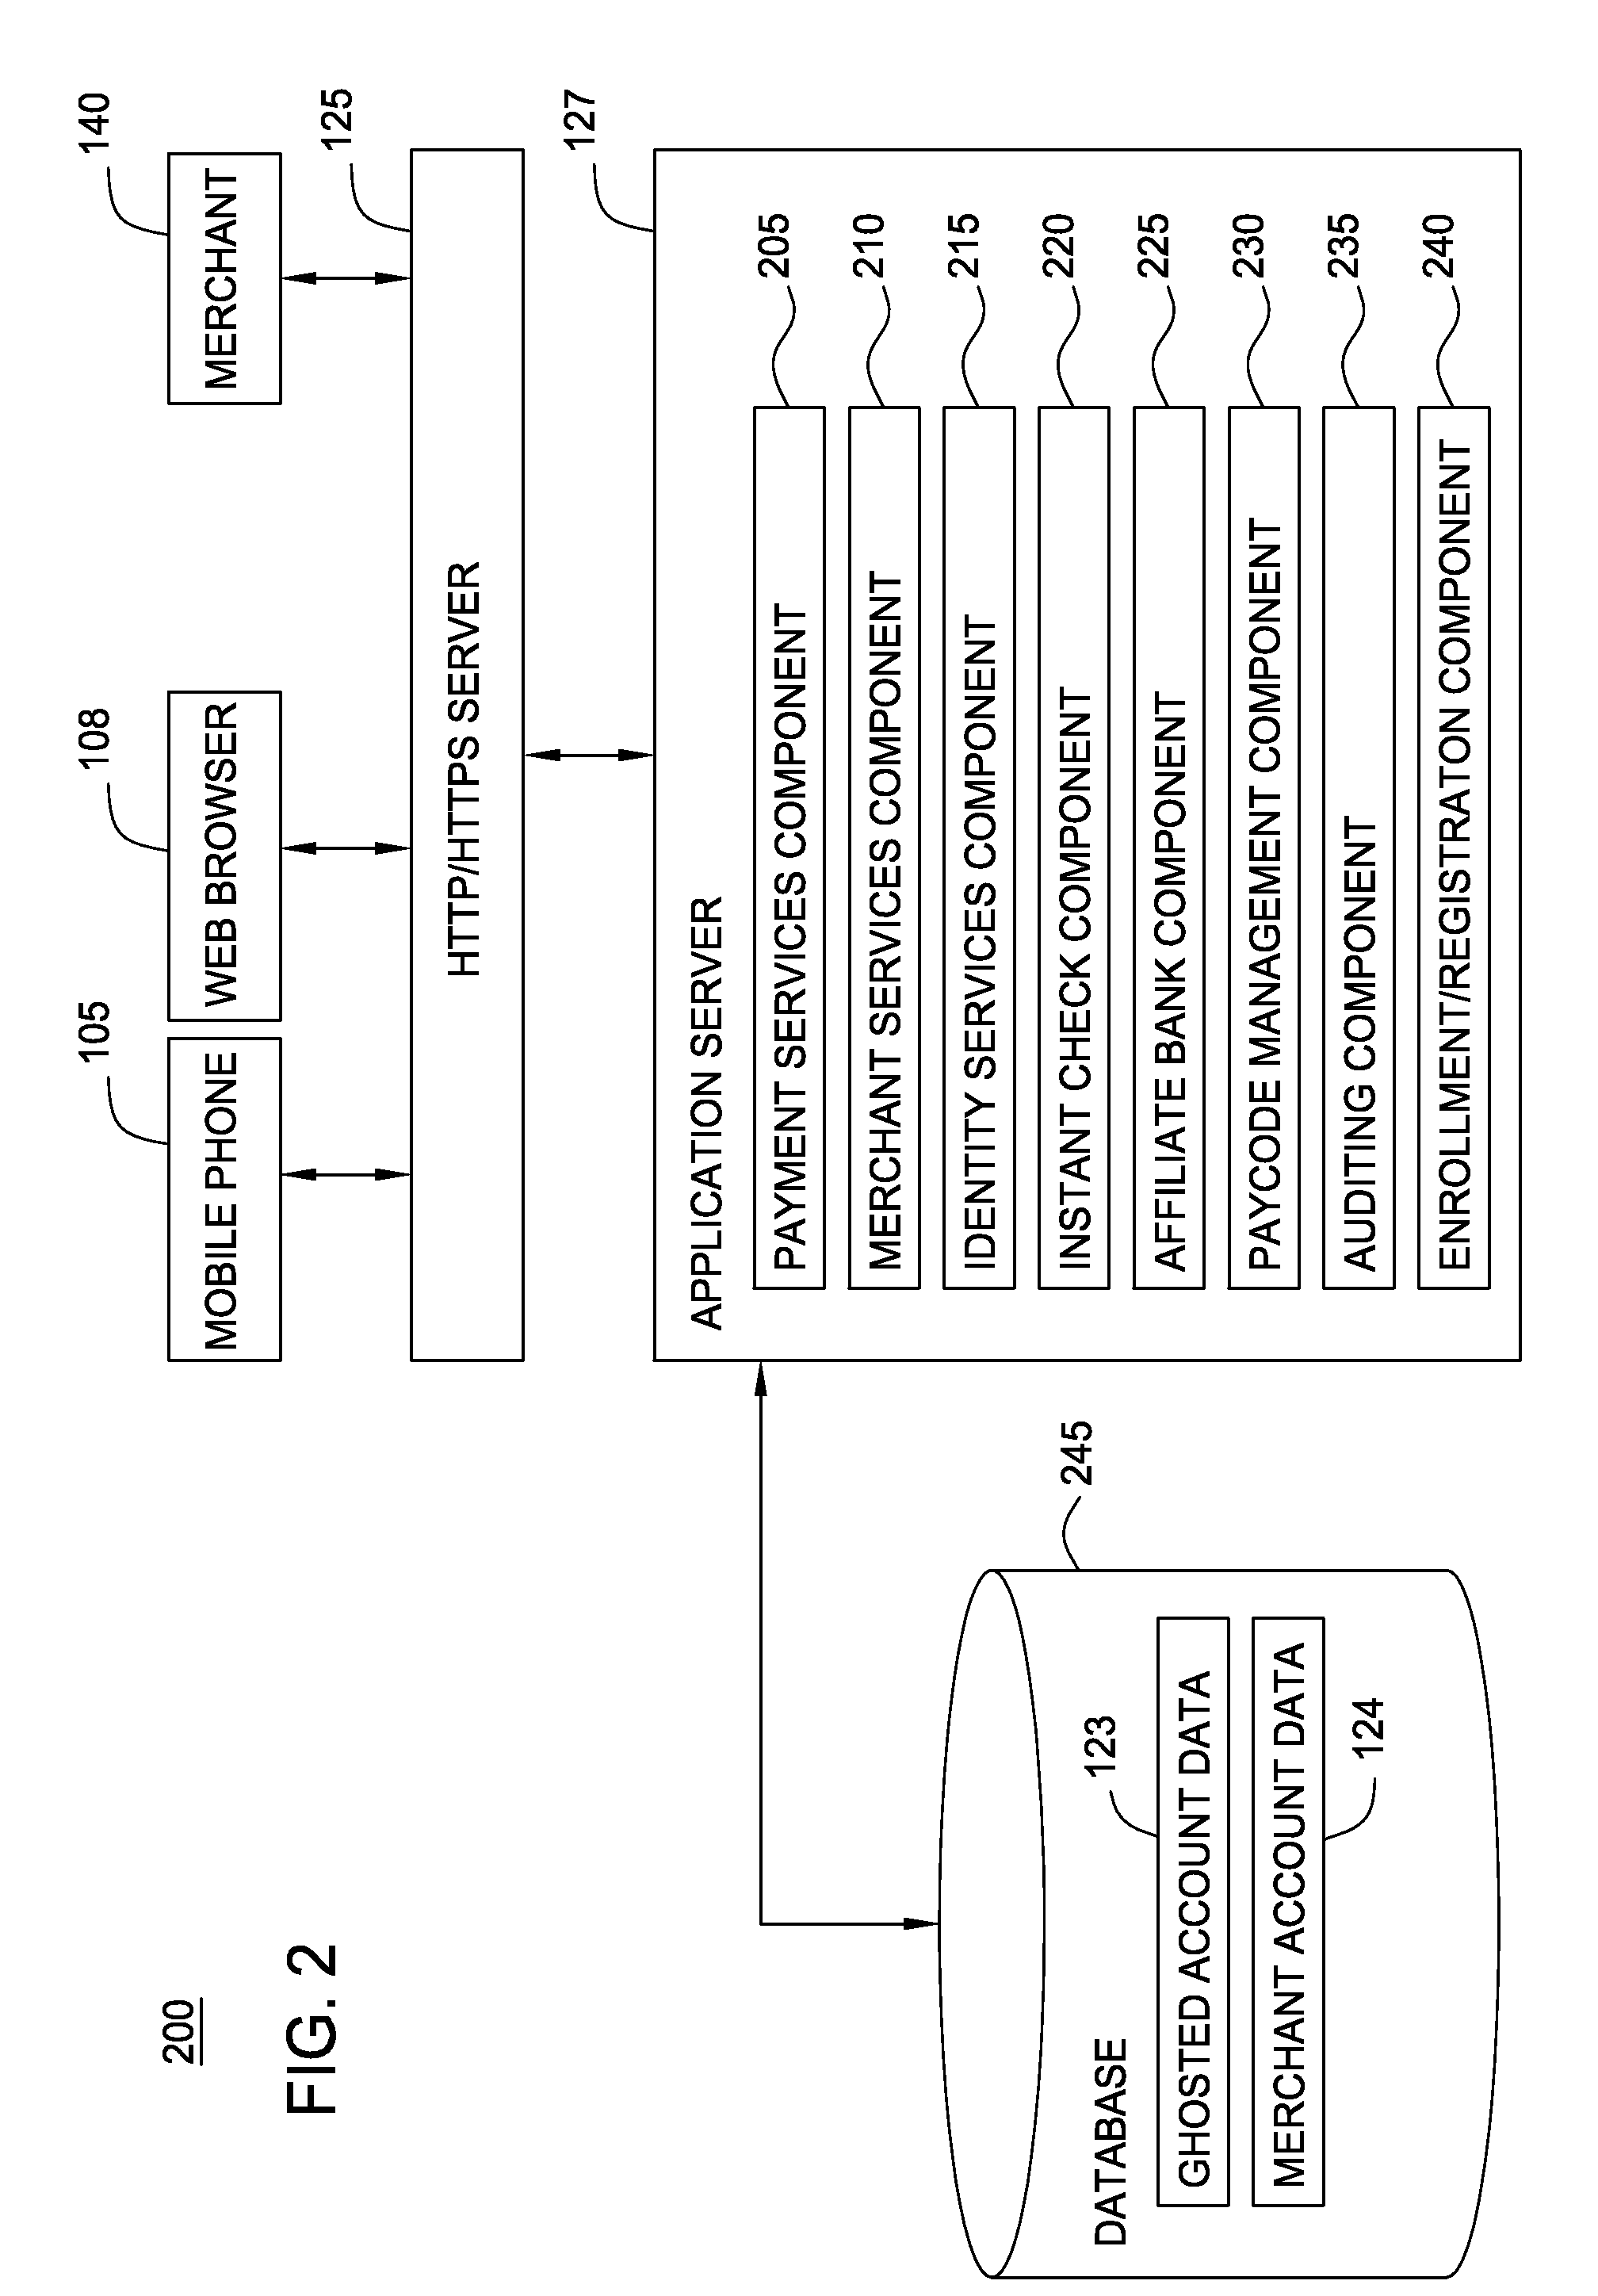 Ghosting payment account data in a mobile telephone payment transaction system